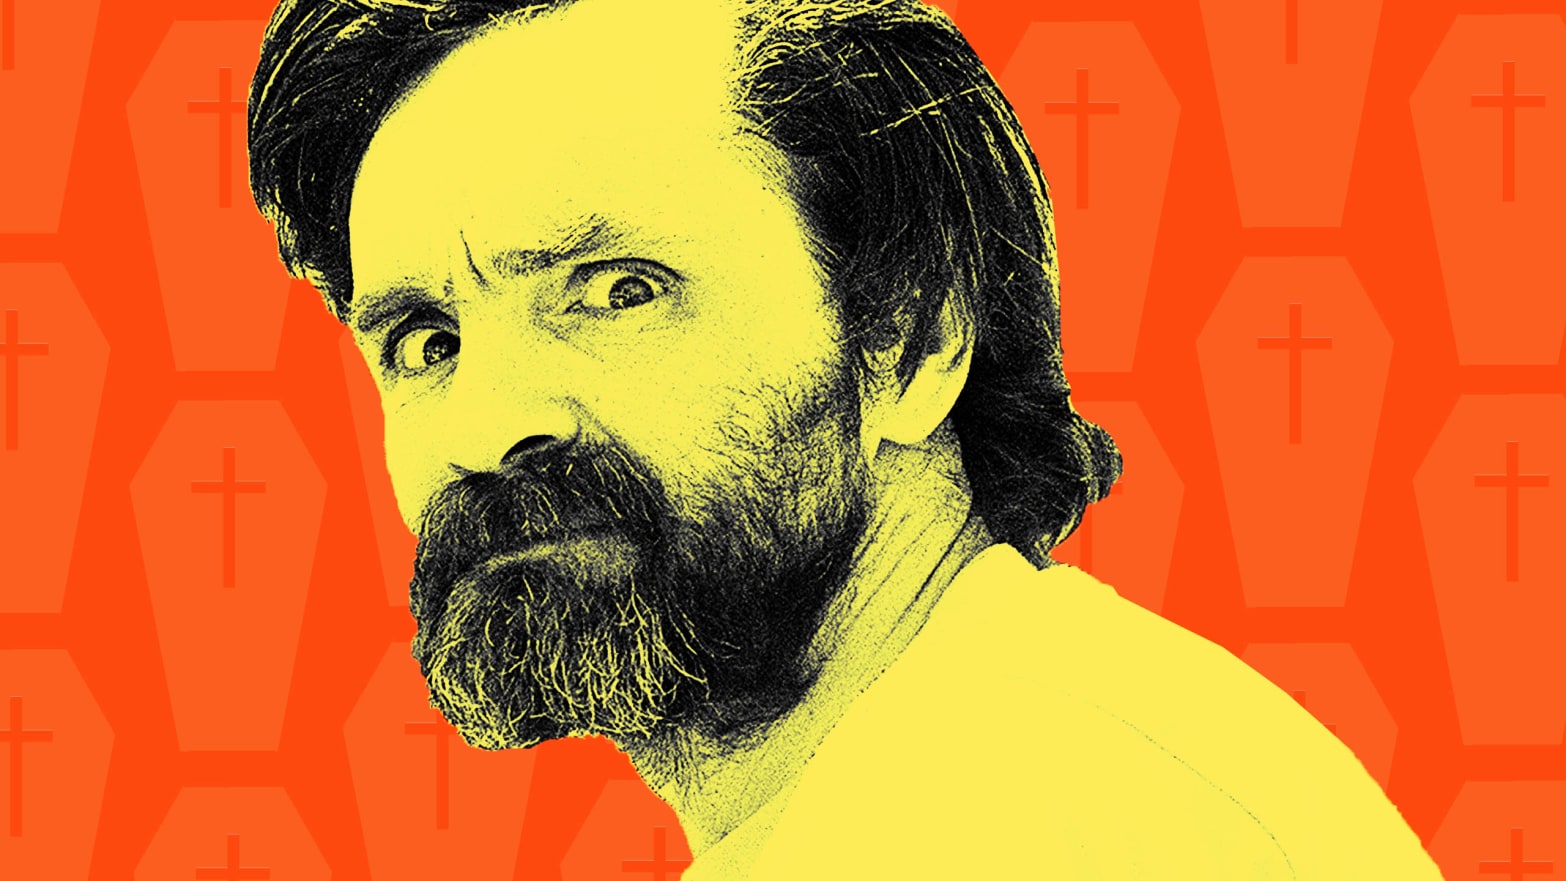 The Battle Over Charles Manson's Corpse